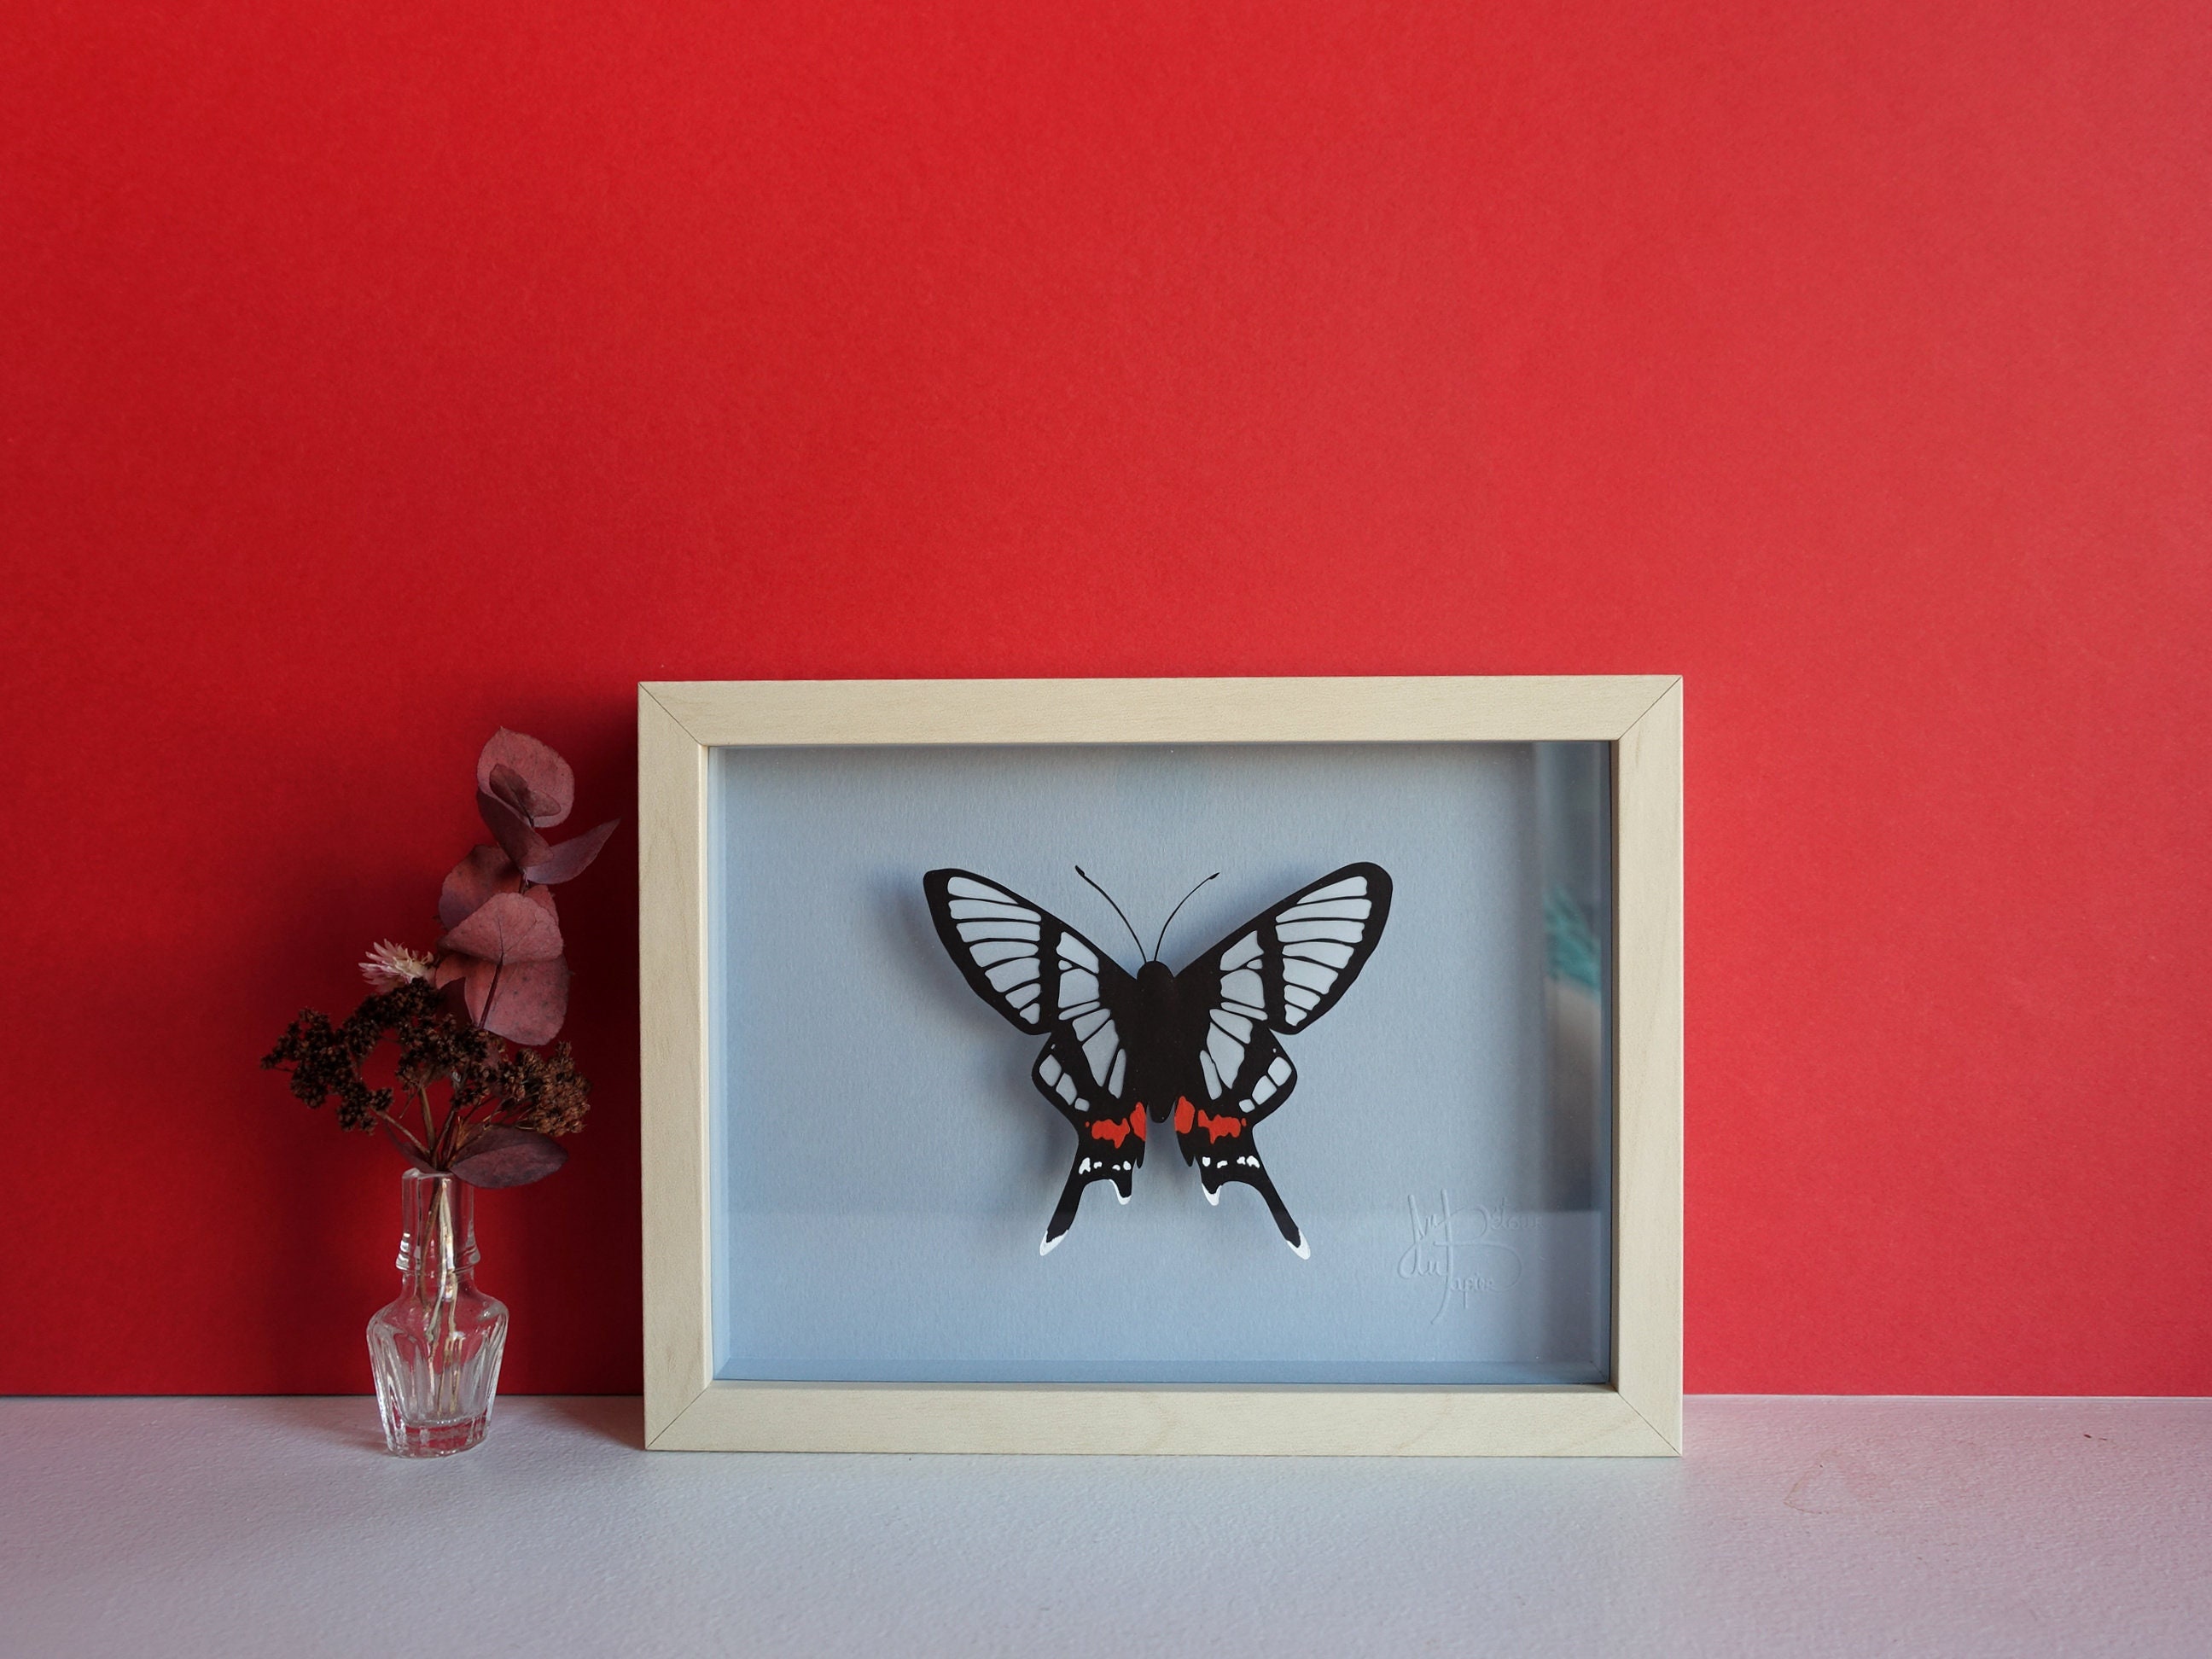 Found these old frames in a charity shop - added a new back and fake  butterflies for some faux taxidermy! : r/upcycling